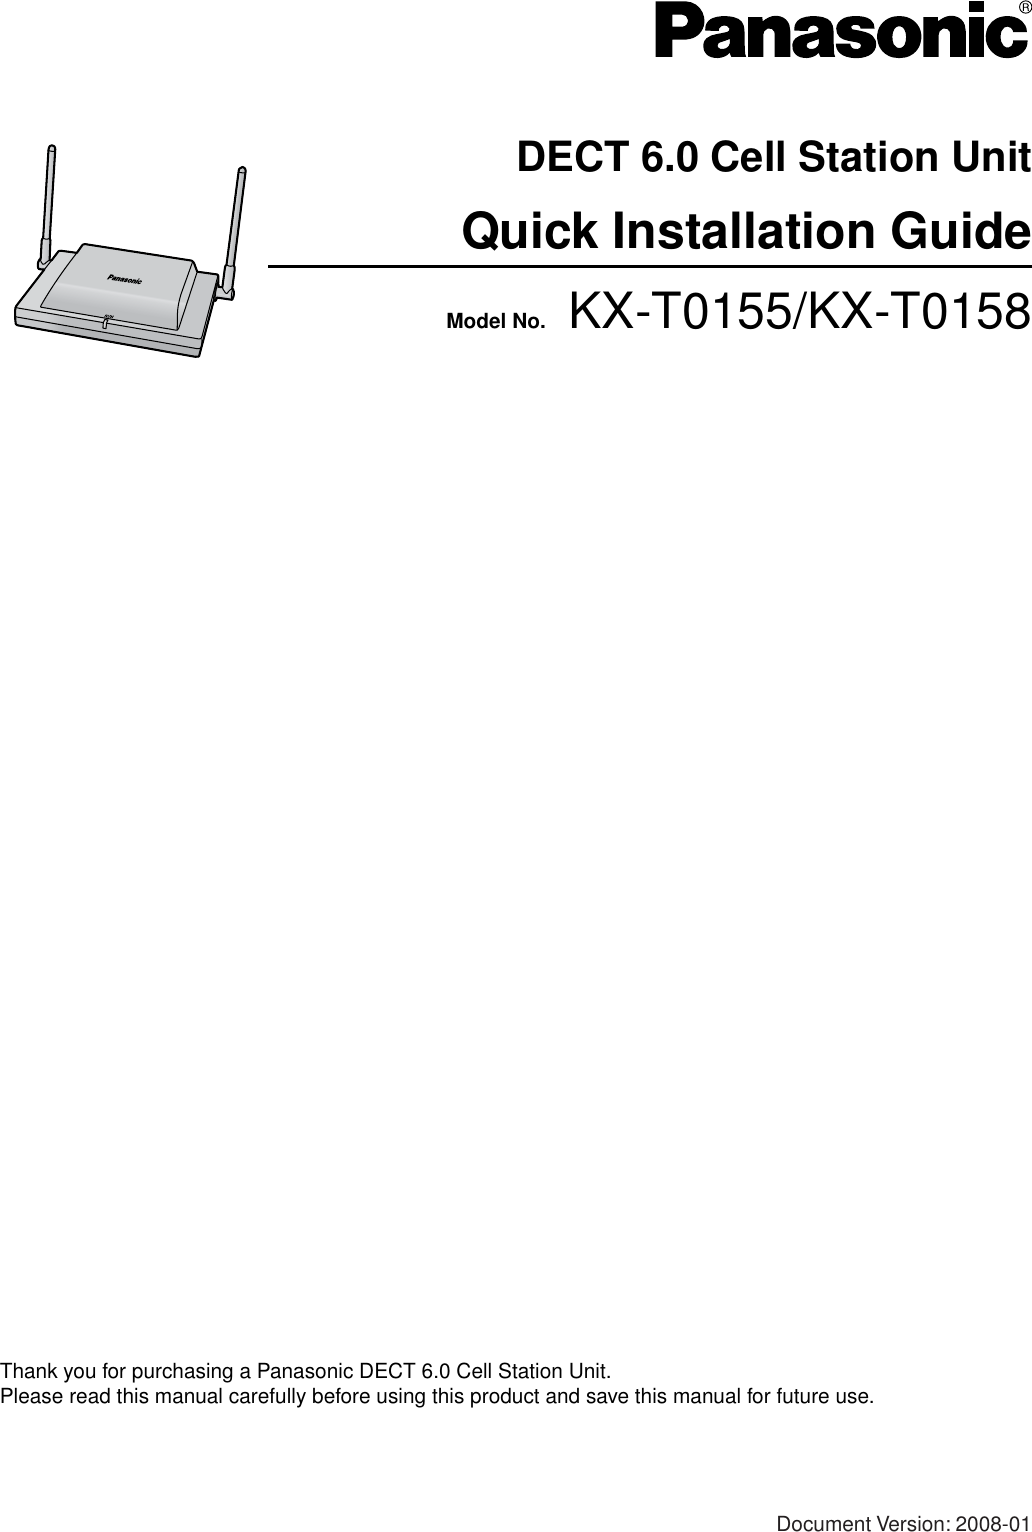 Model No.    KX-T0155/KX-T0158DECT 6.0 Cell Station UnitQuick Installation GuideDocument Version: 2008-01Thank you for purchasing a Panasonic DECT 6.0 Cell Station Unit.Please read this manual carefully before using this product and save this manual for future use.